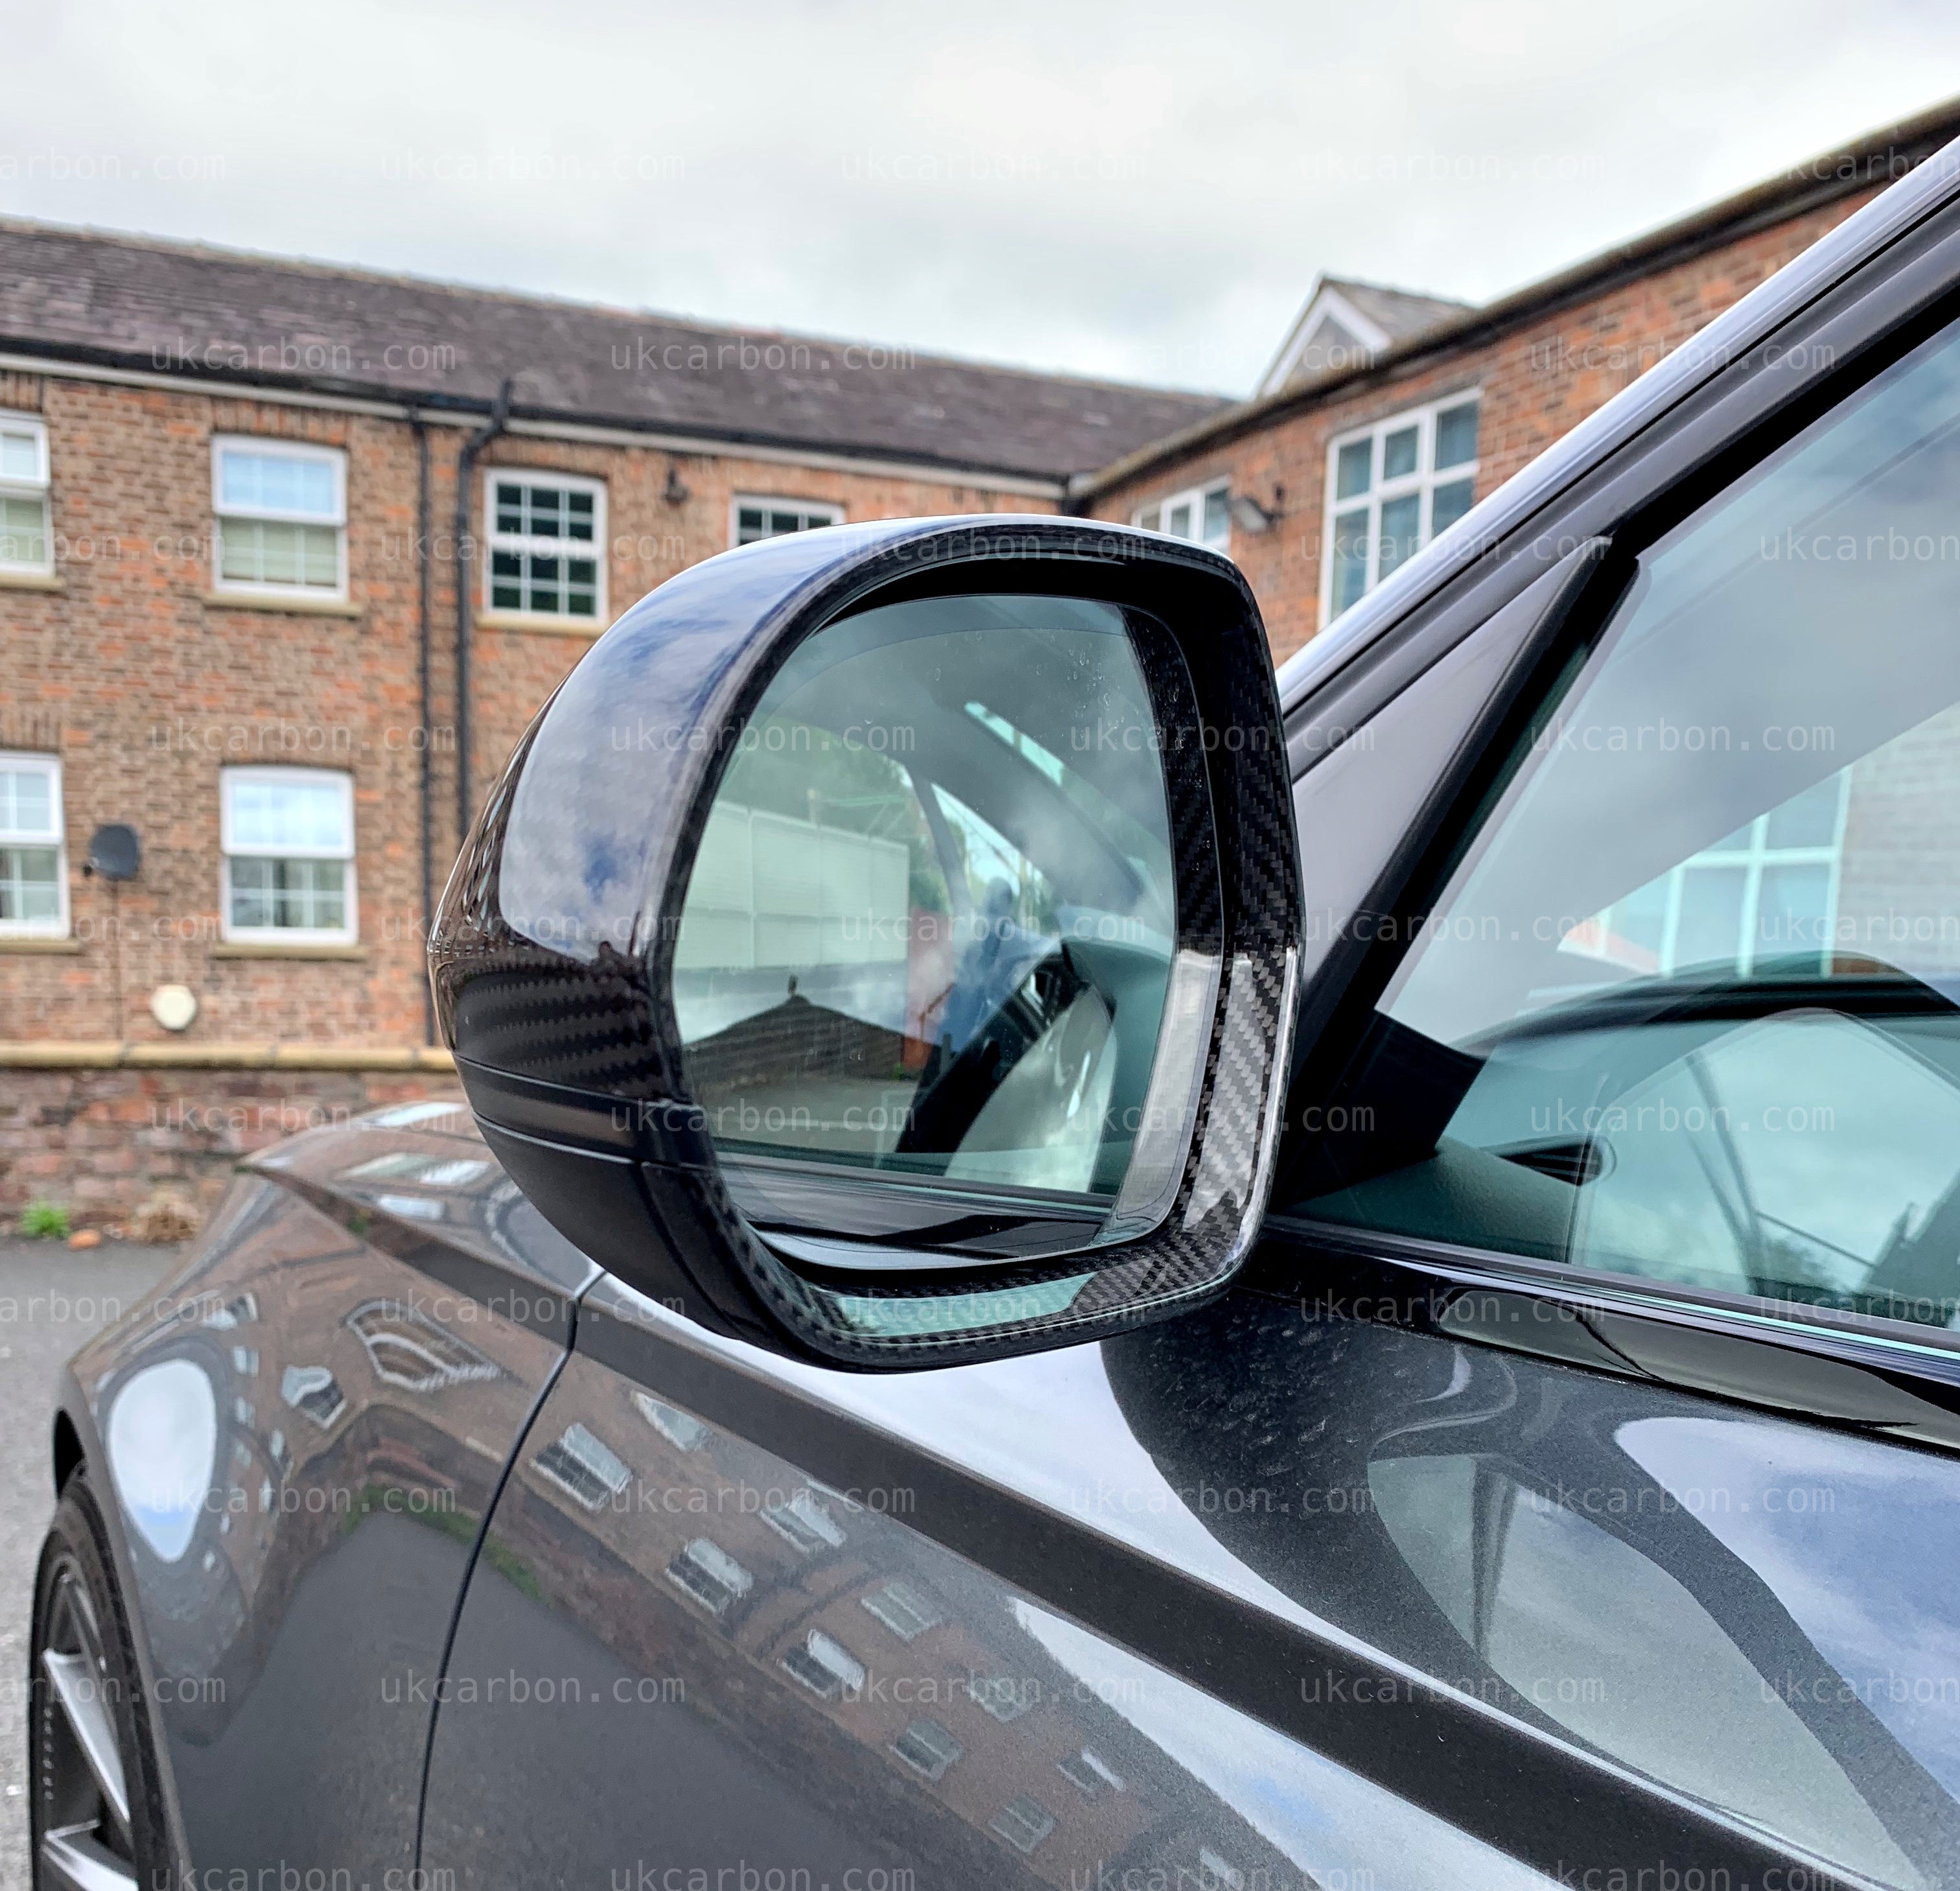 Audi A6 S6 RS6 Carbon Fibre Mirror Cover Replacement by UKCarbon